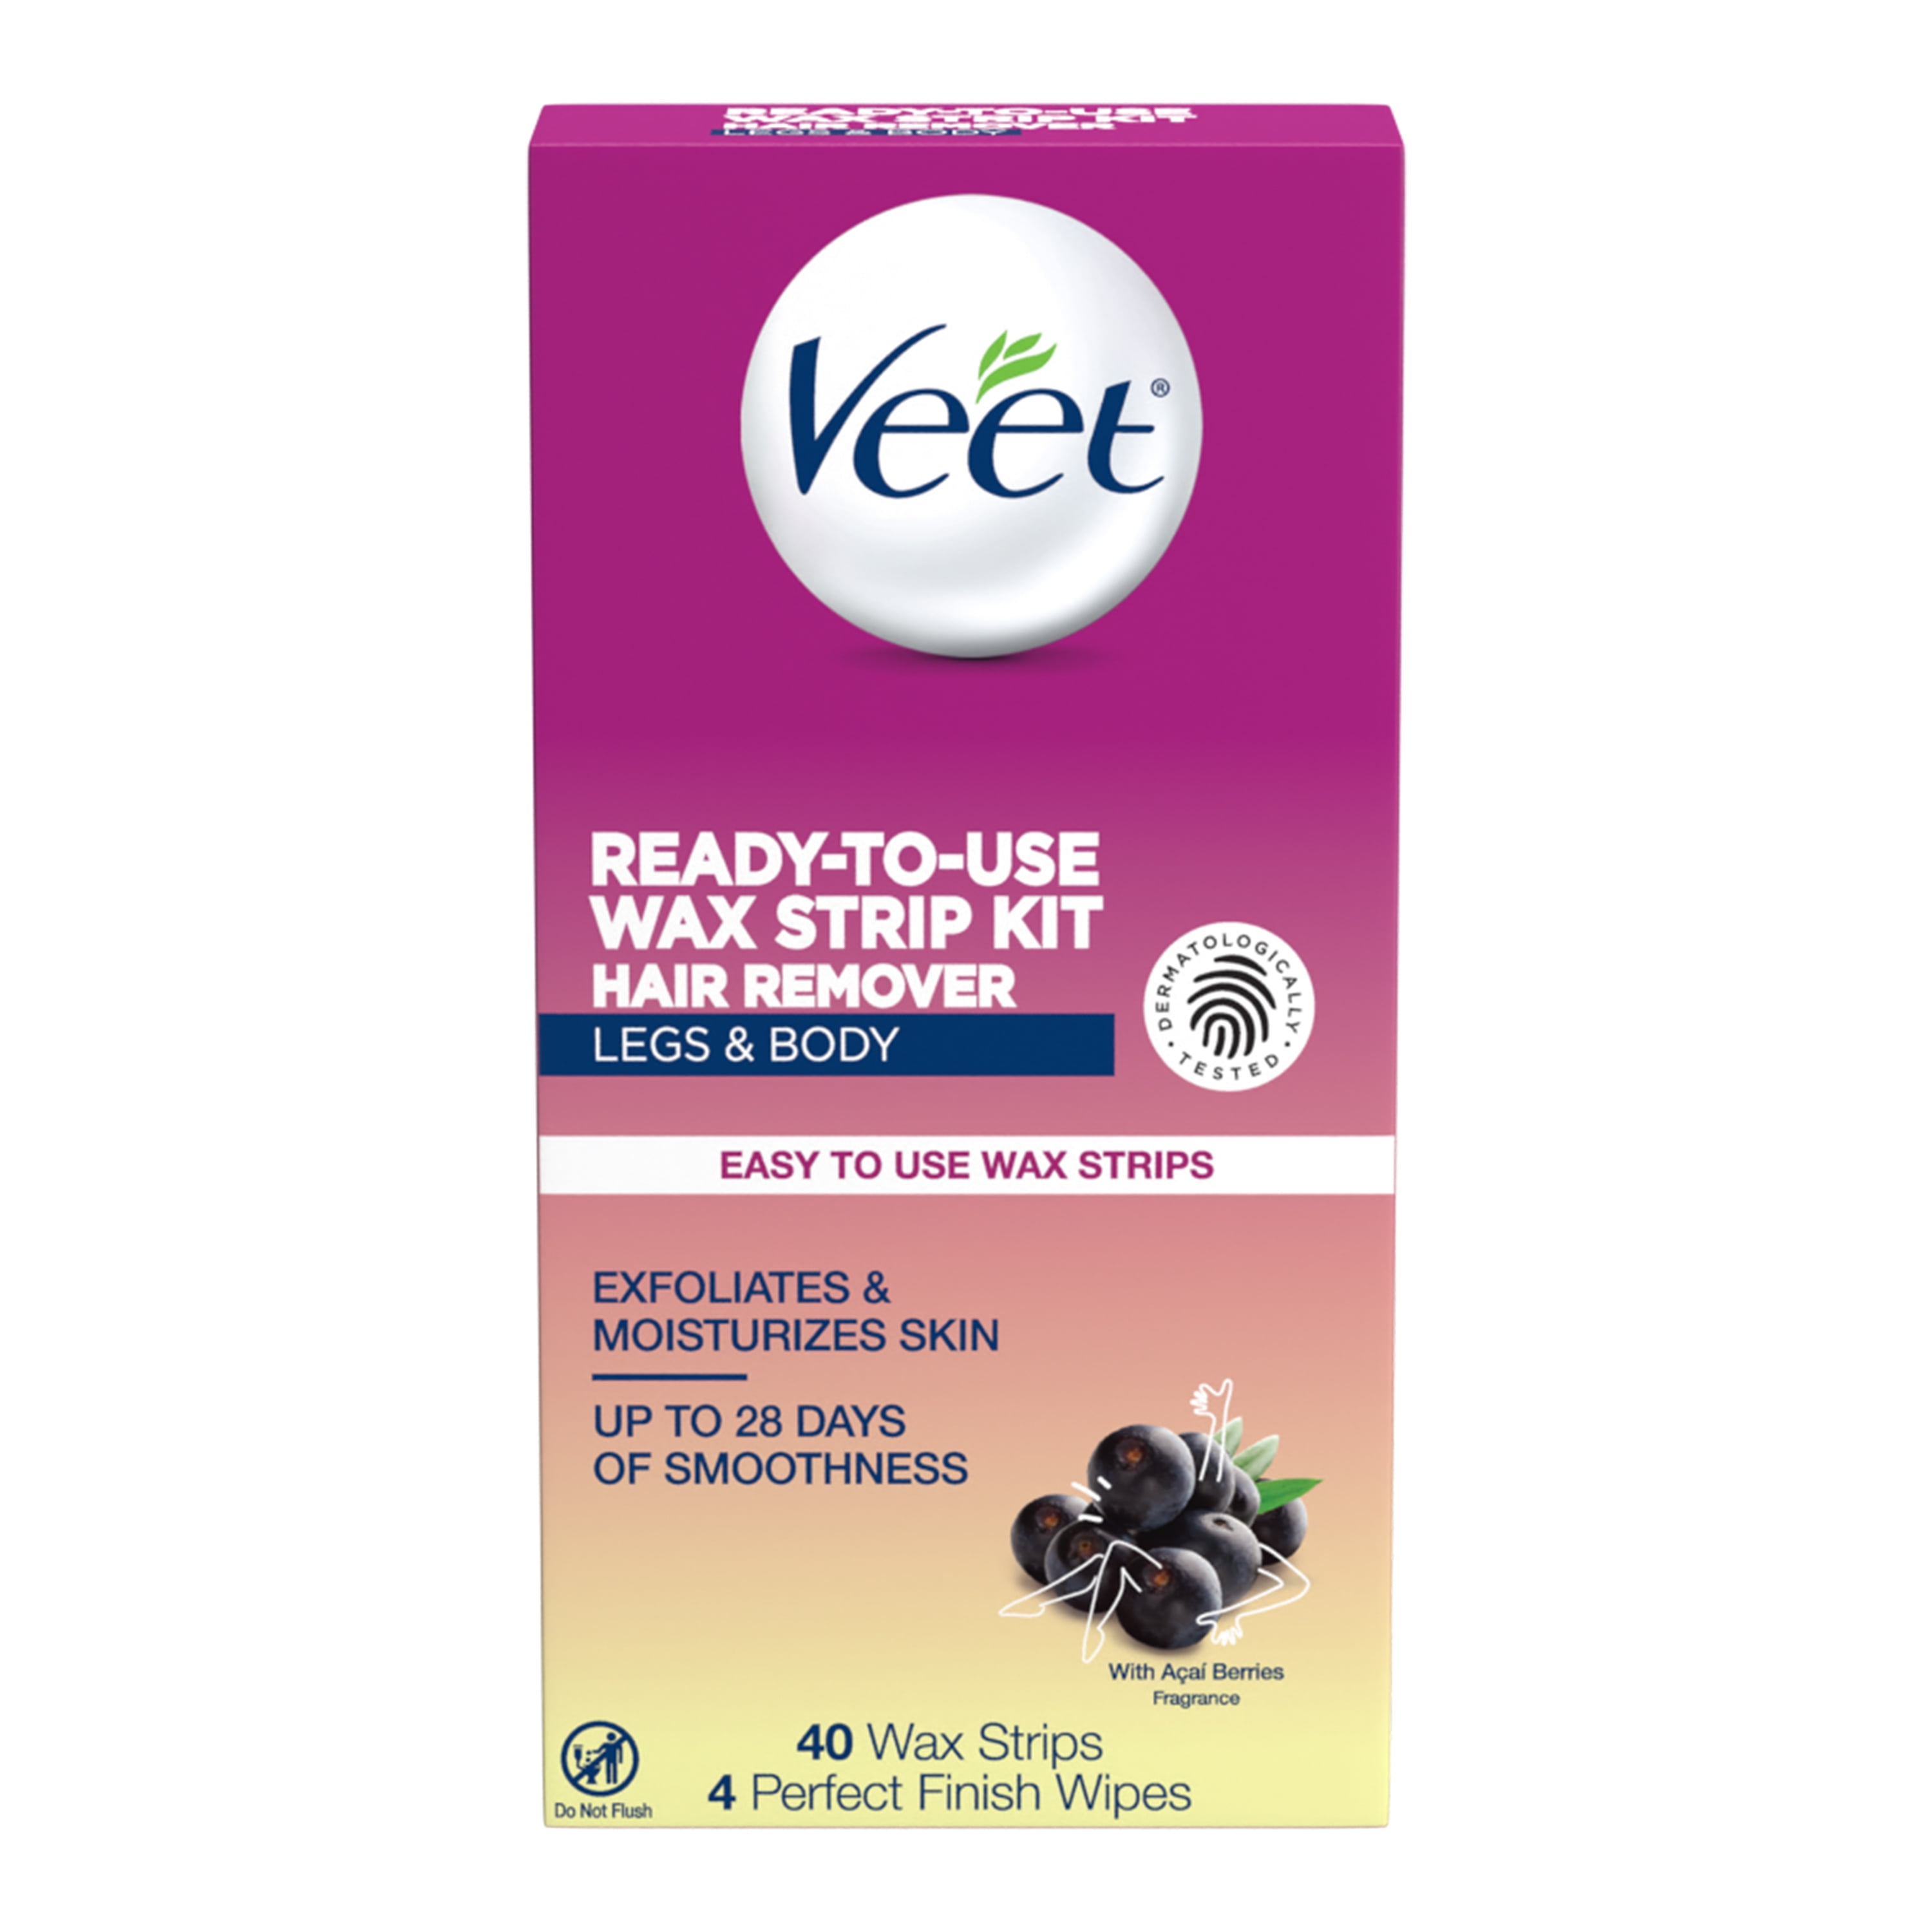 Hair Removal Wax Strips- VEET Easy- Gelwax Technology, Sensitive Formula  Ready-to-Use Hair Remover Wax Strip Kit with Shea Butter, 40 wax strips  with 4 wipes (Case of 4) 